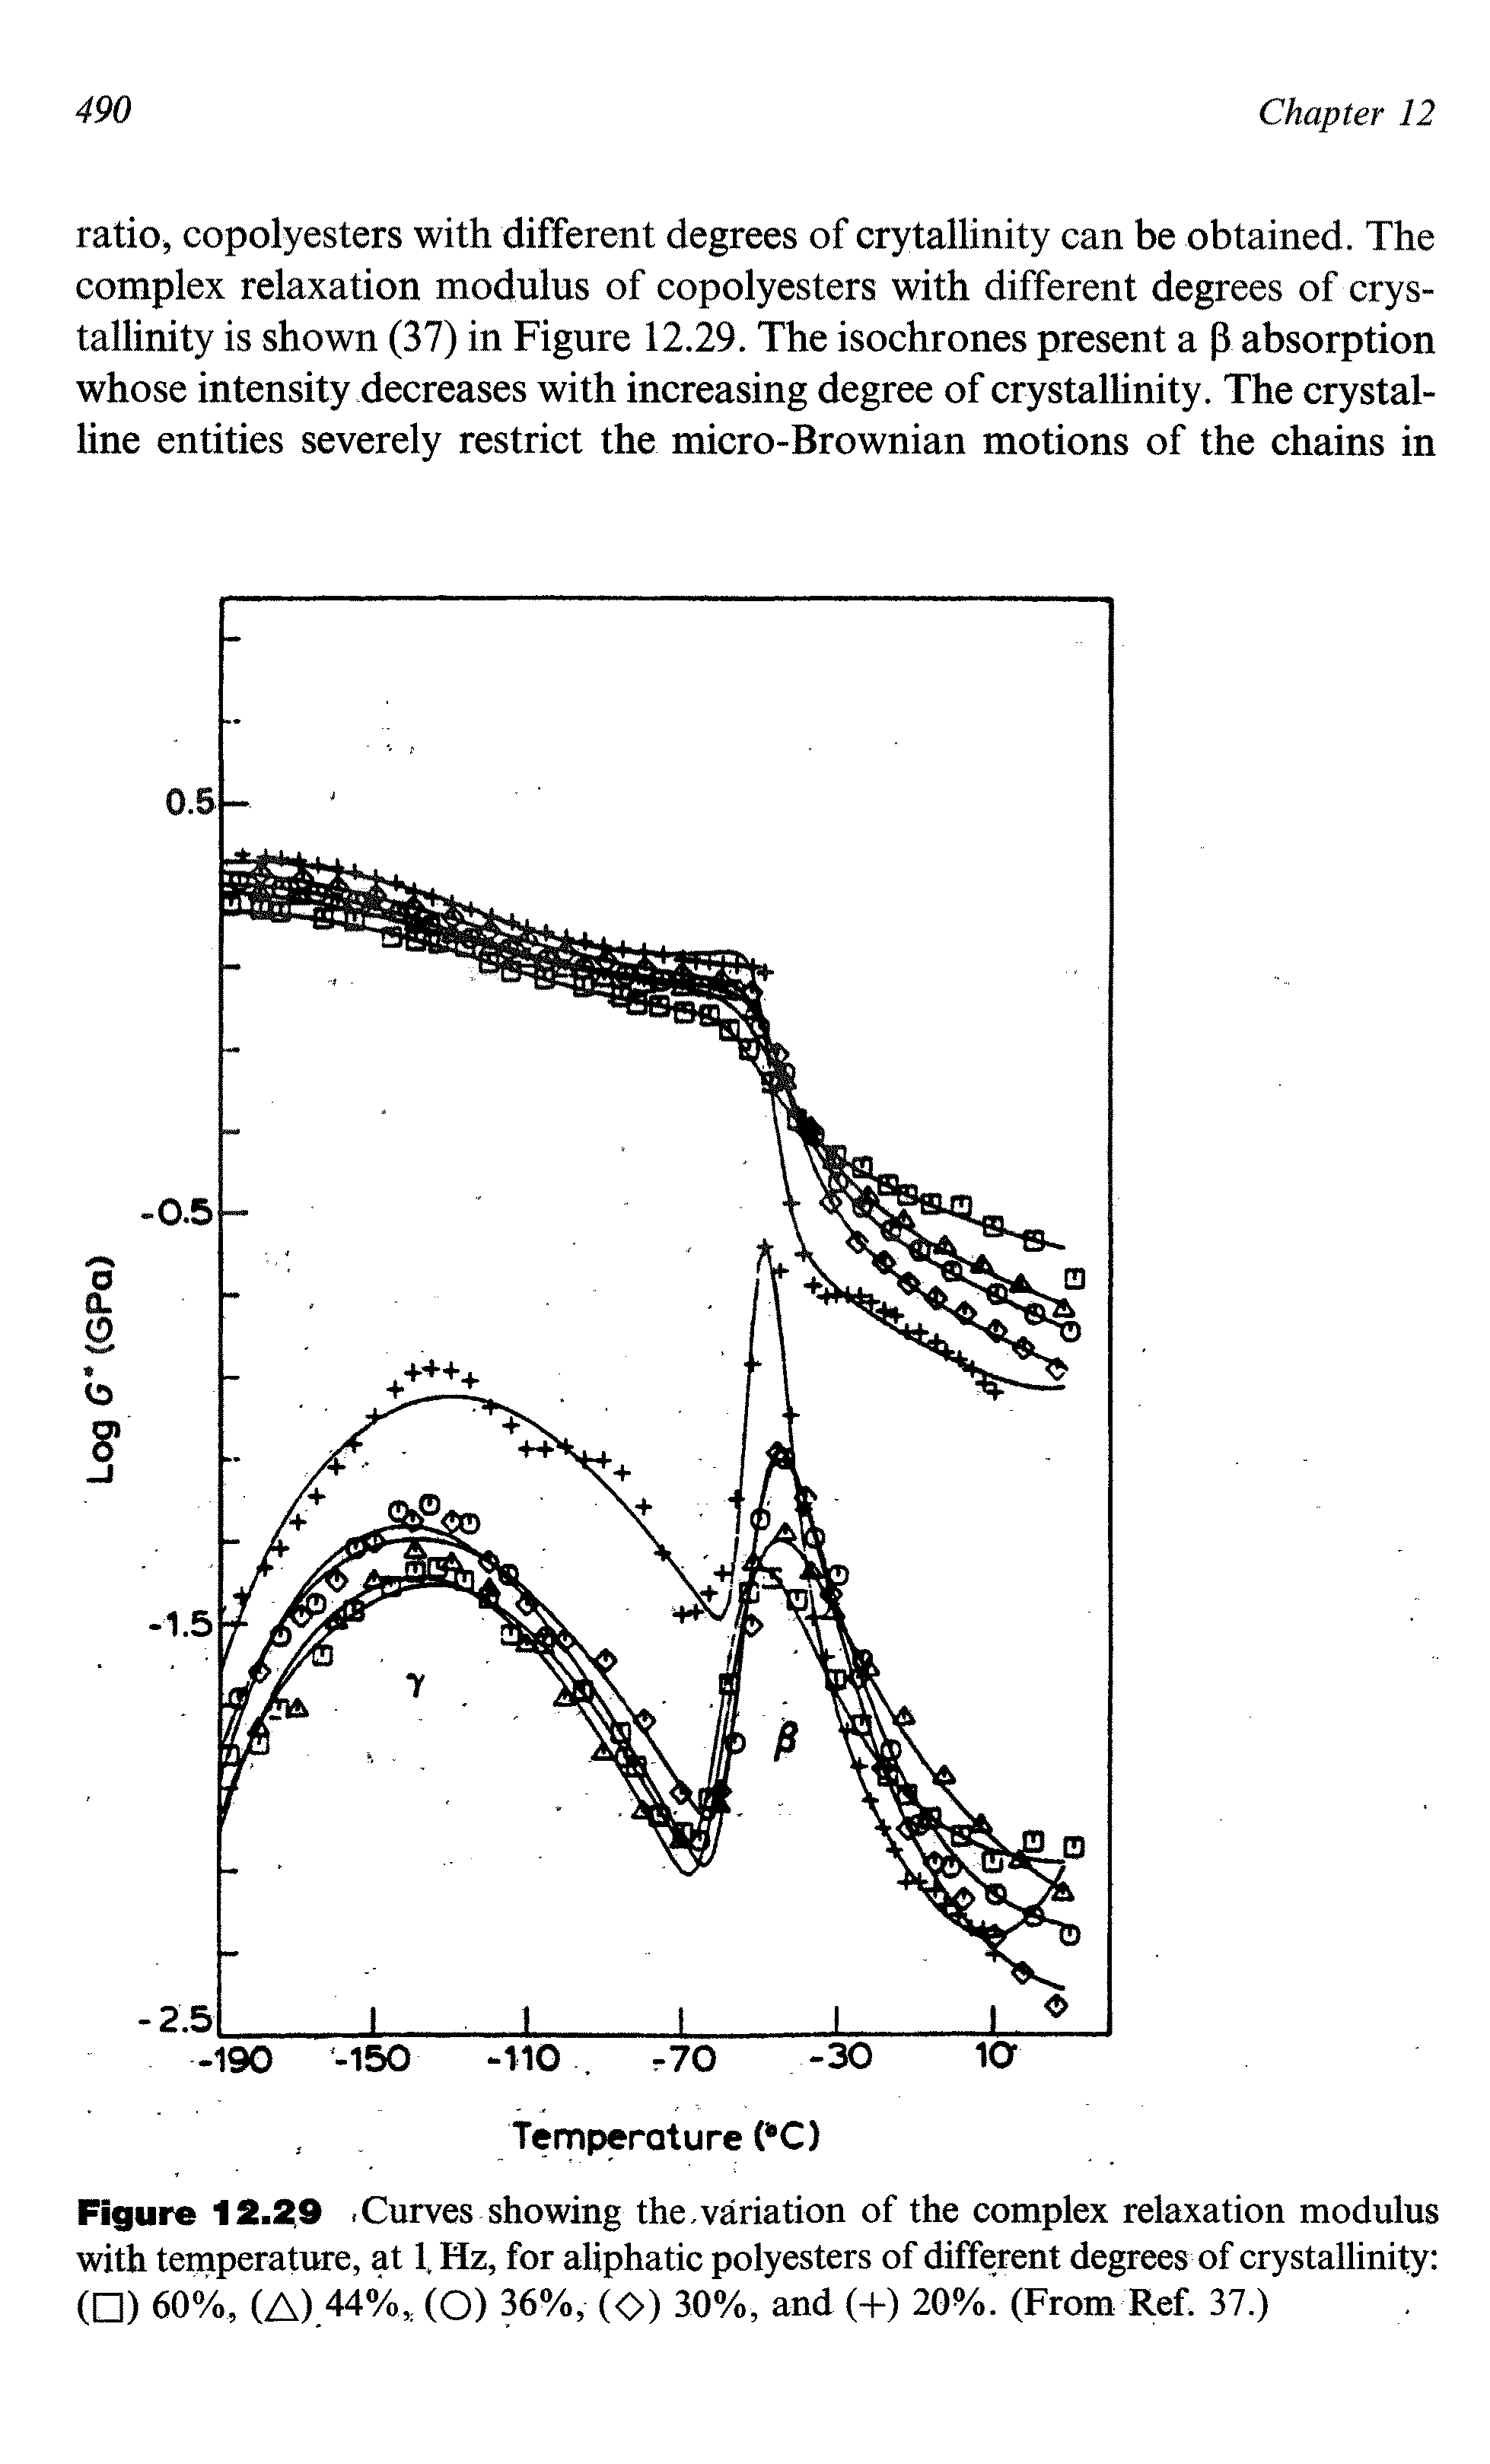 Figure 12.2(9. Curves showing the. variation of the complex relaxation modulus with temperature, at 1. Hz, for aliphatic polyesters of different degrees of crystallinity ( ) 60%, (A).44 /o (O) 36%, (O) 30%, and (-f) 20%. (From Ref. 37.)...